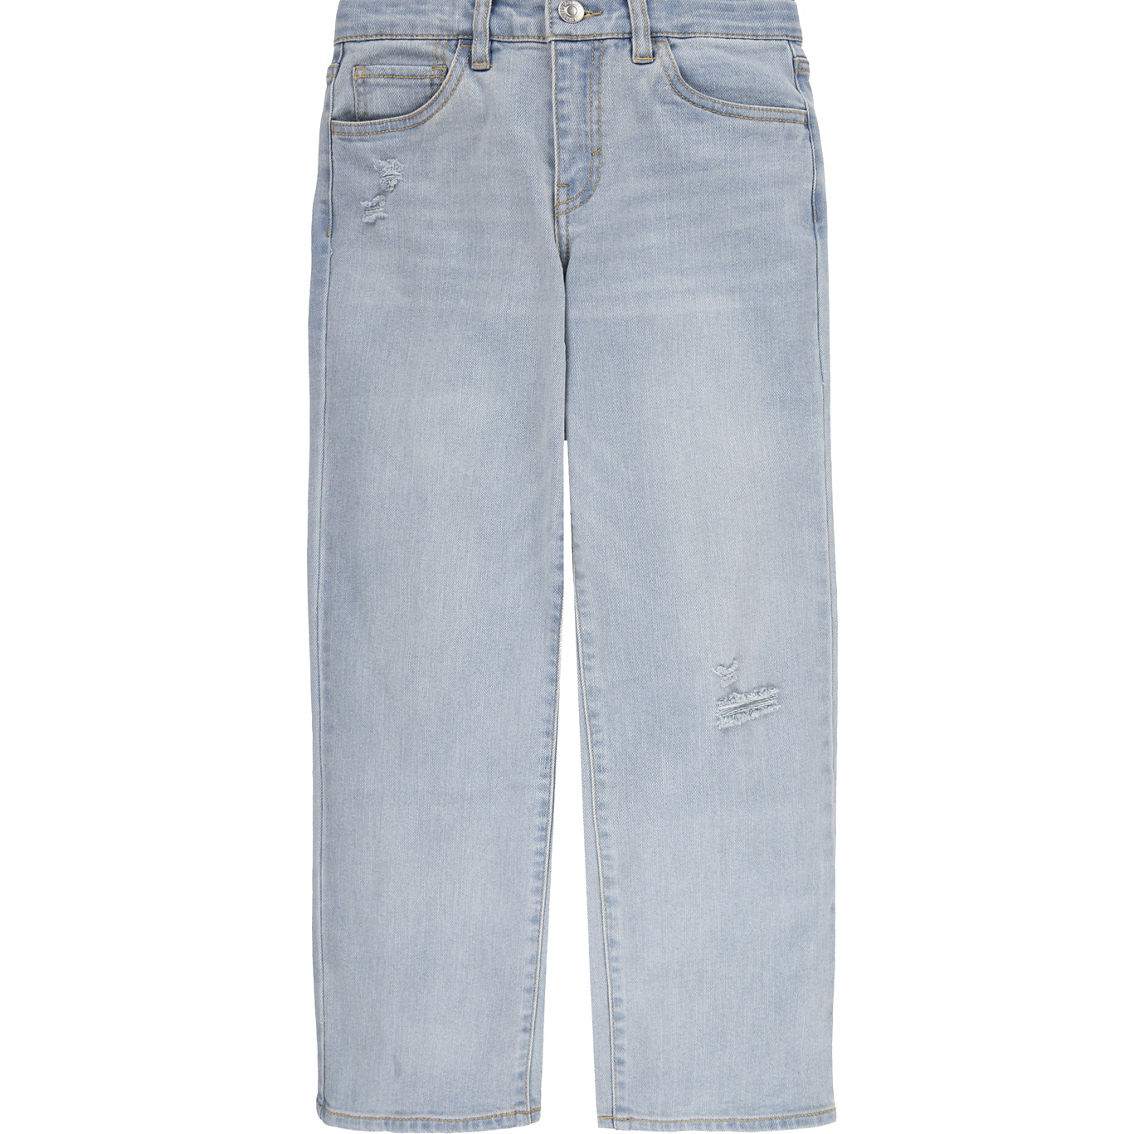 Levi's Girls Wide Leg Jeans | Girls 7-16 | Clothing & Accessories ...